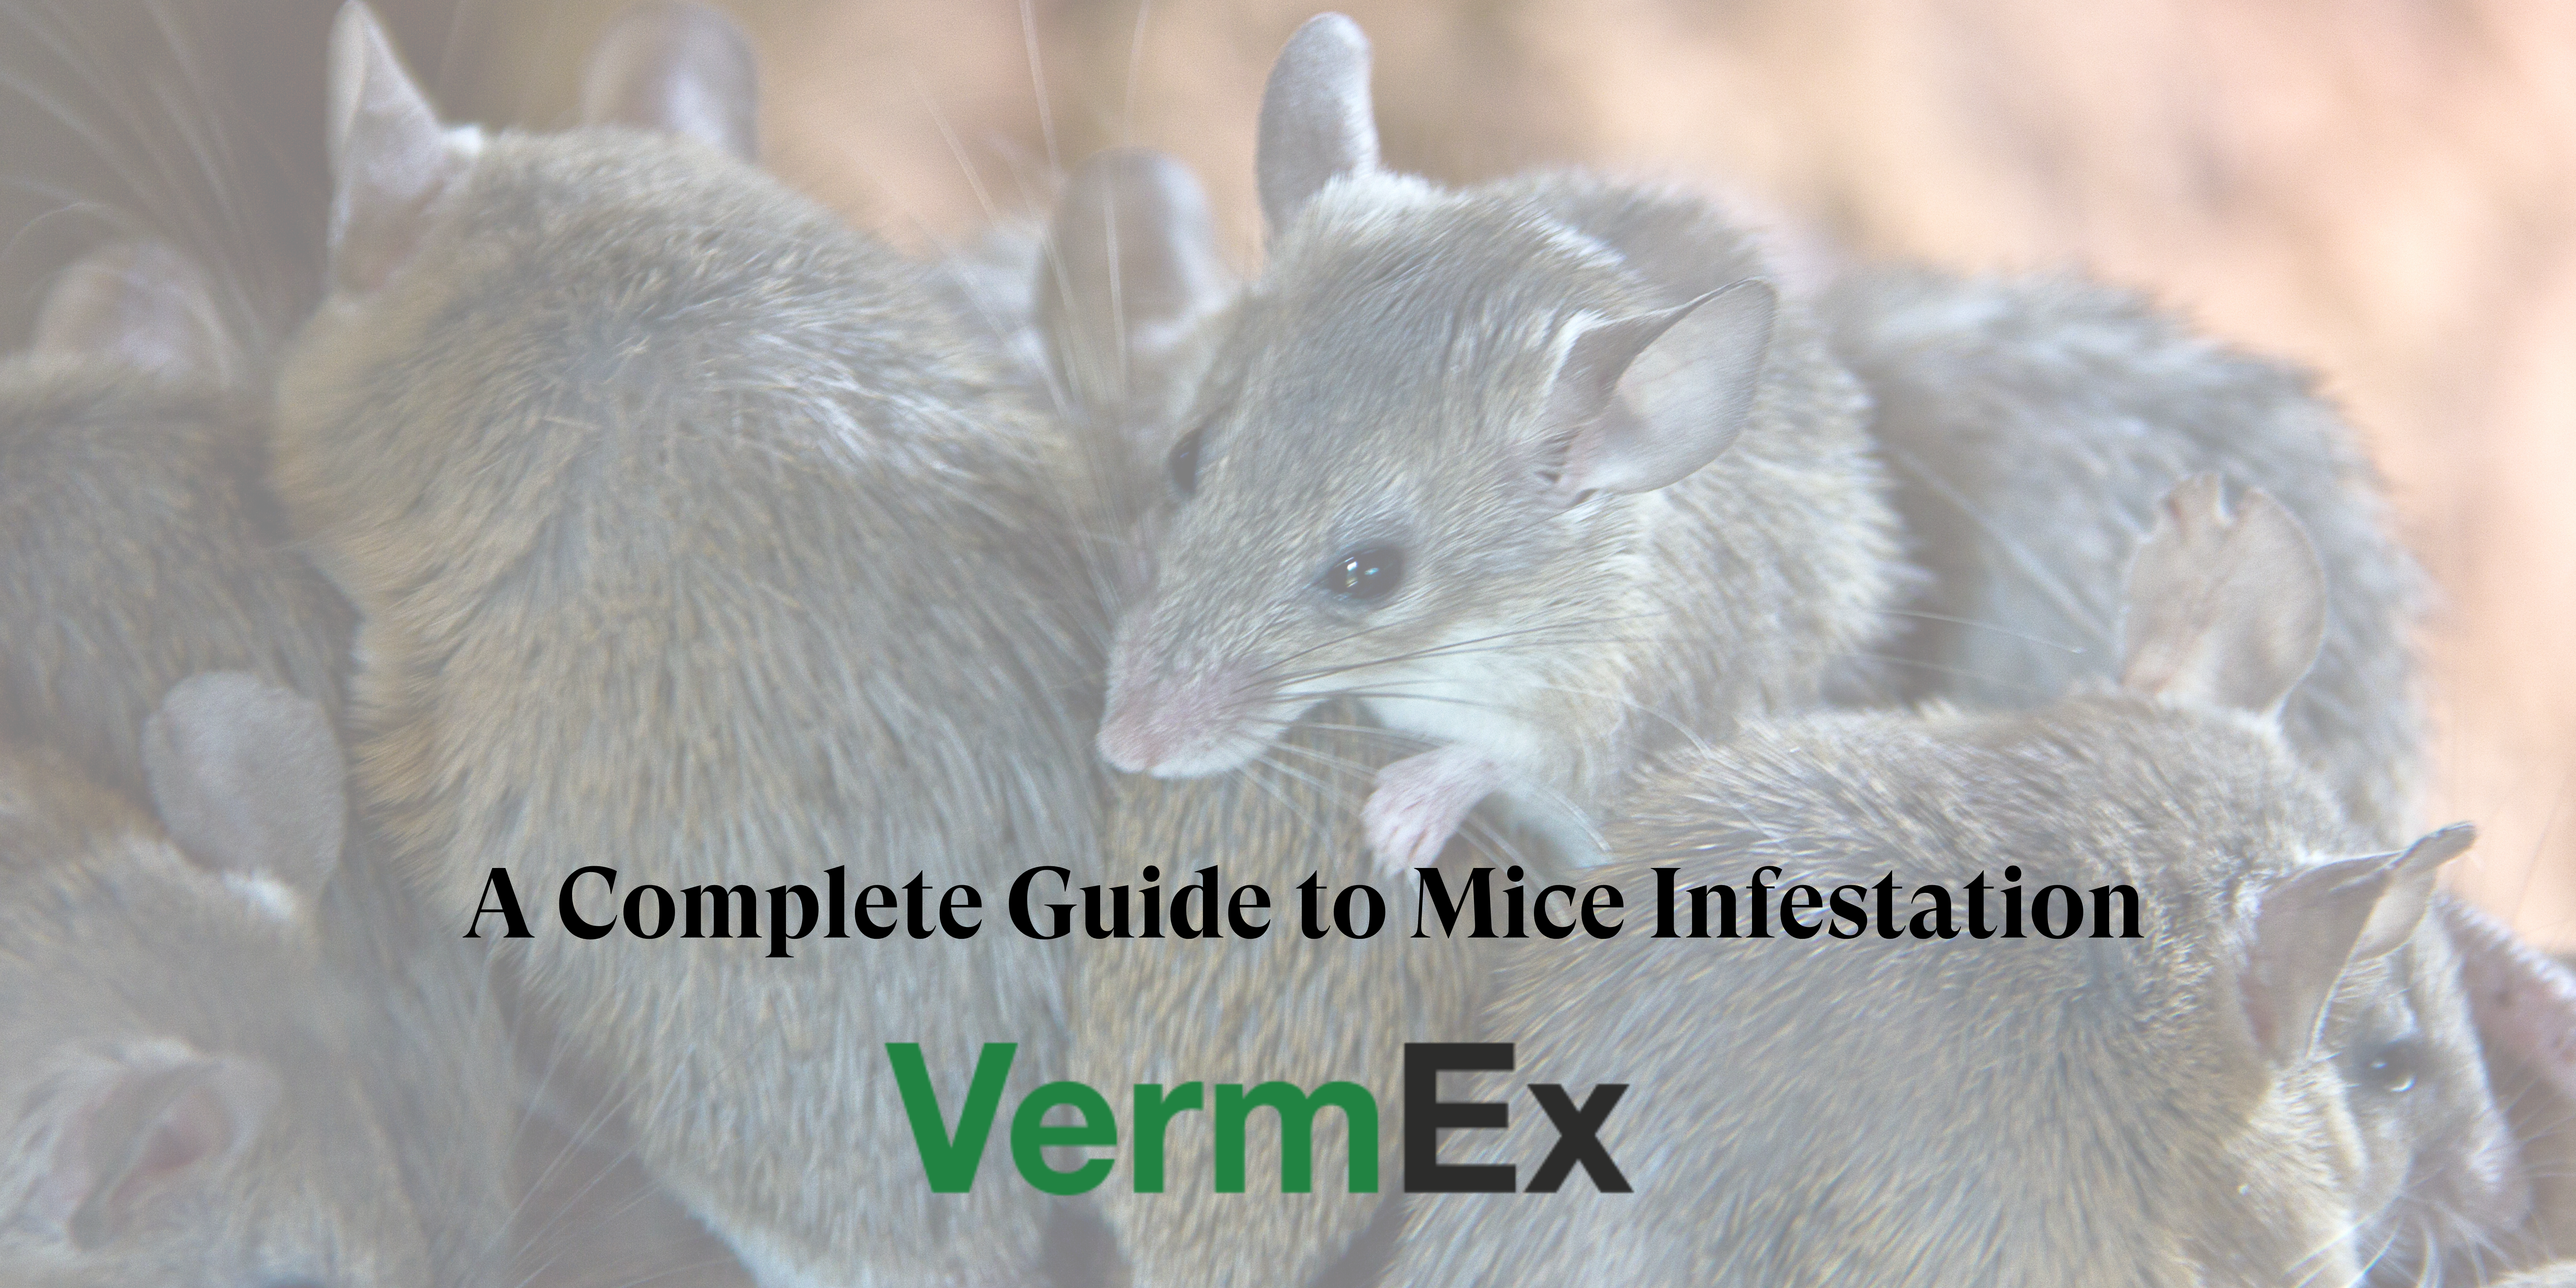 Complete Guide to Mice Infestation